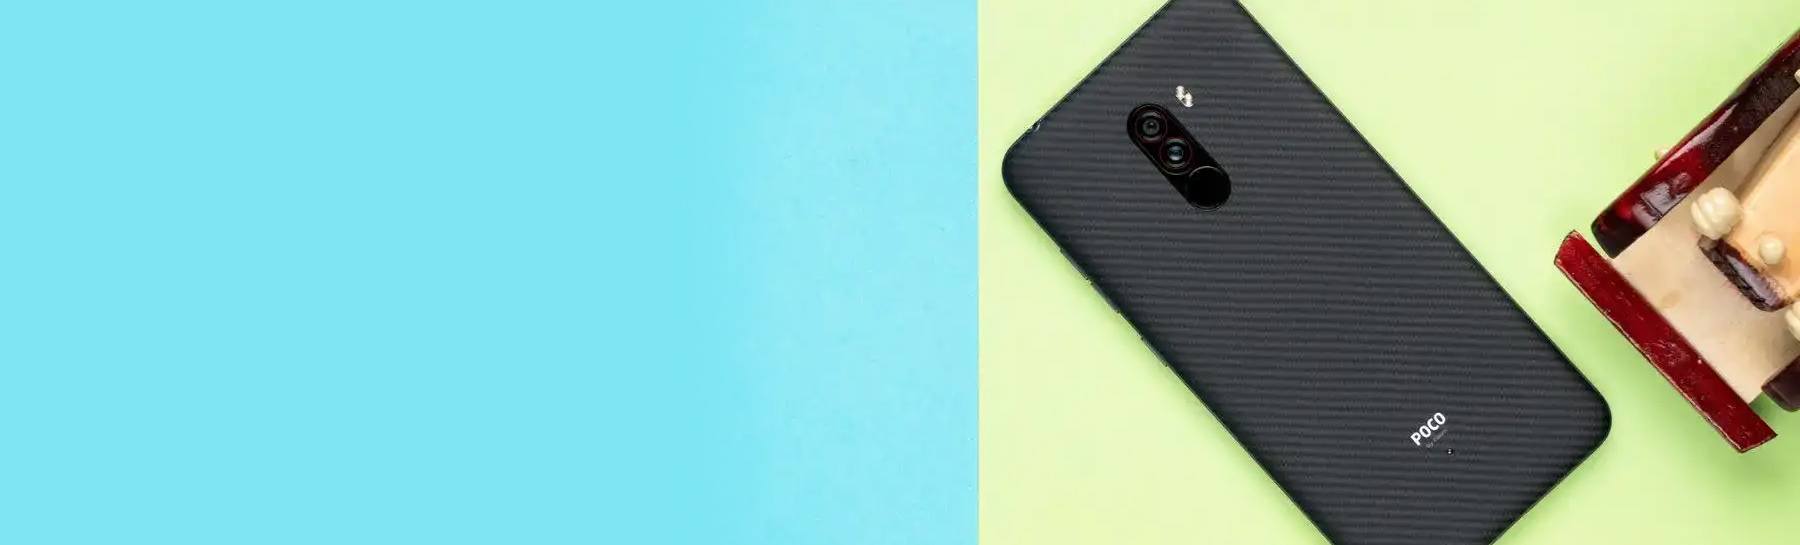 POCO F smartphones - learn about the history of the series